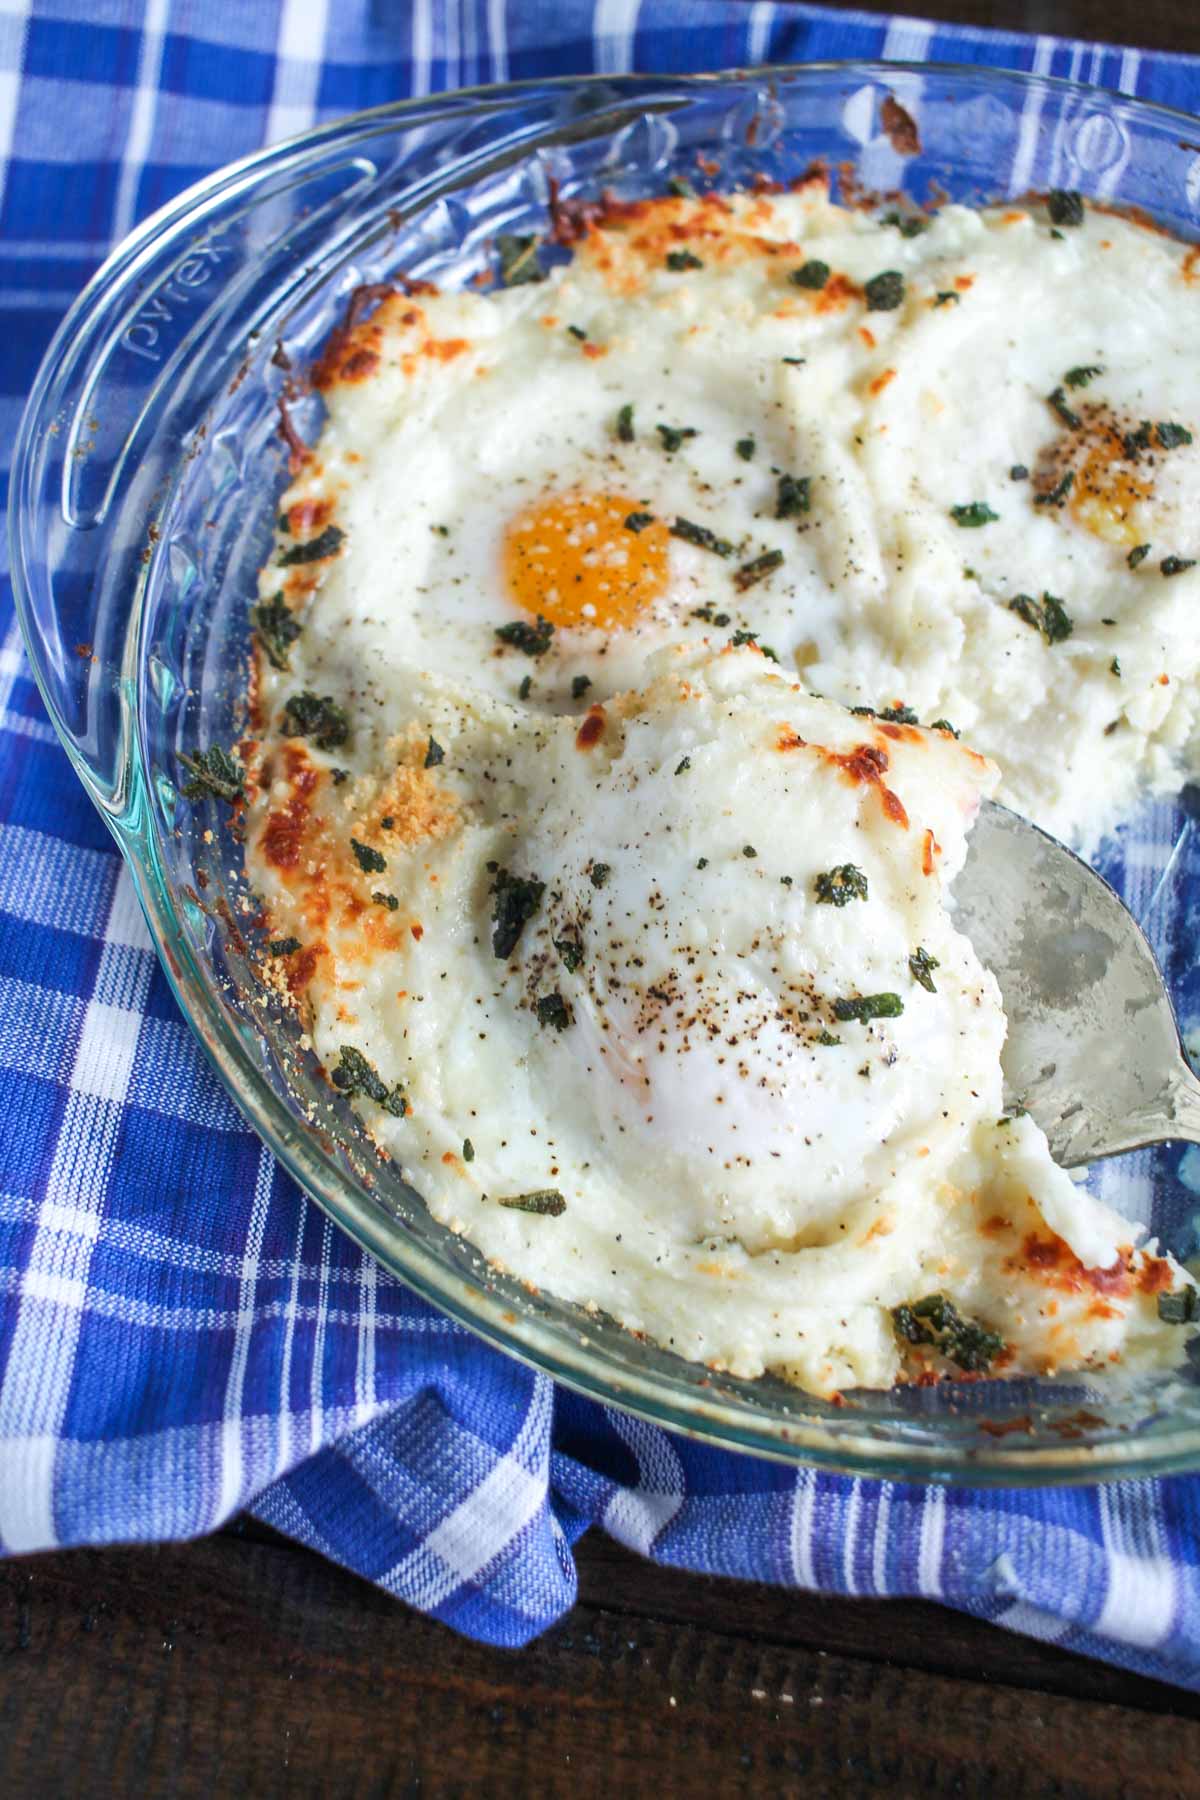 Wondering what to make with leftover mashed potatoes? These eggs baked in mashed potatoes are a perfect breakfast!